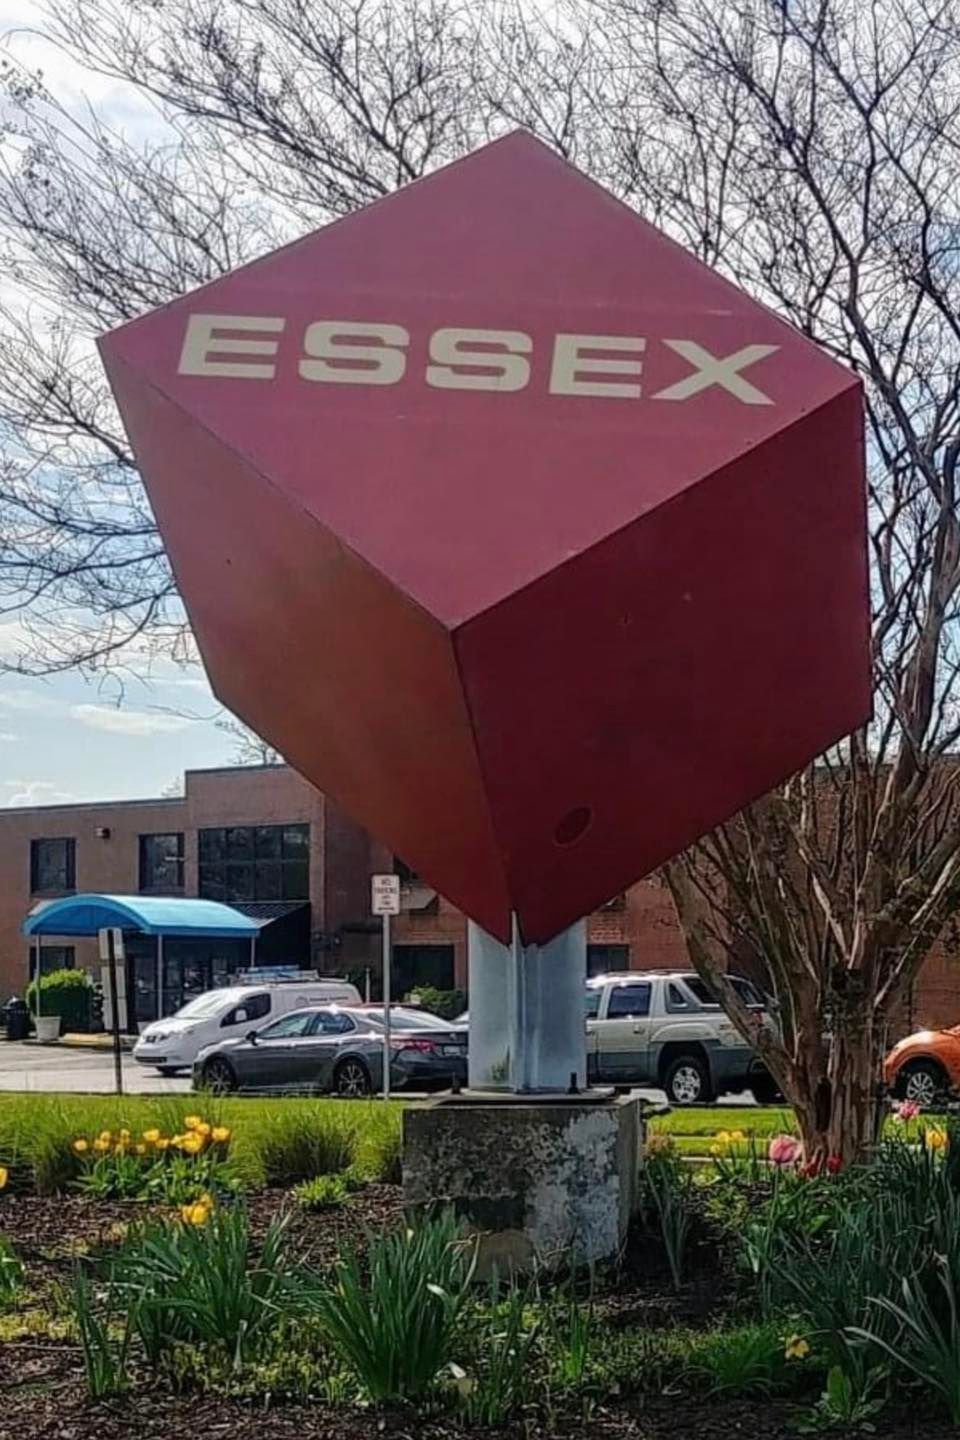 The Essex Cube Has Been Removed and Retired